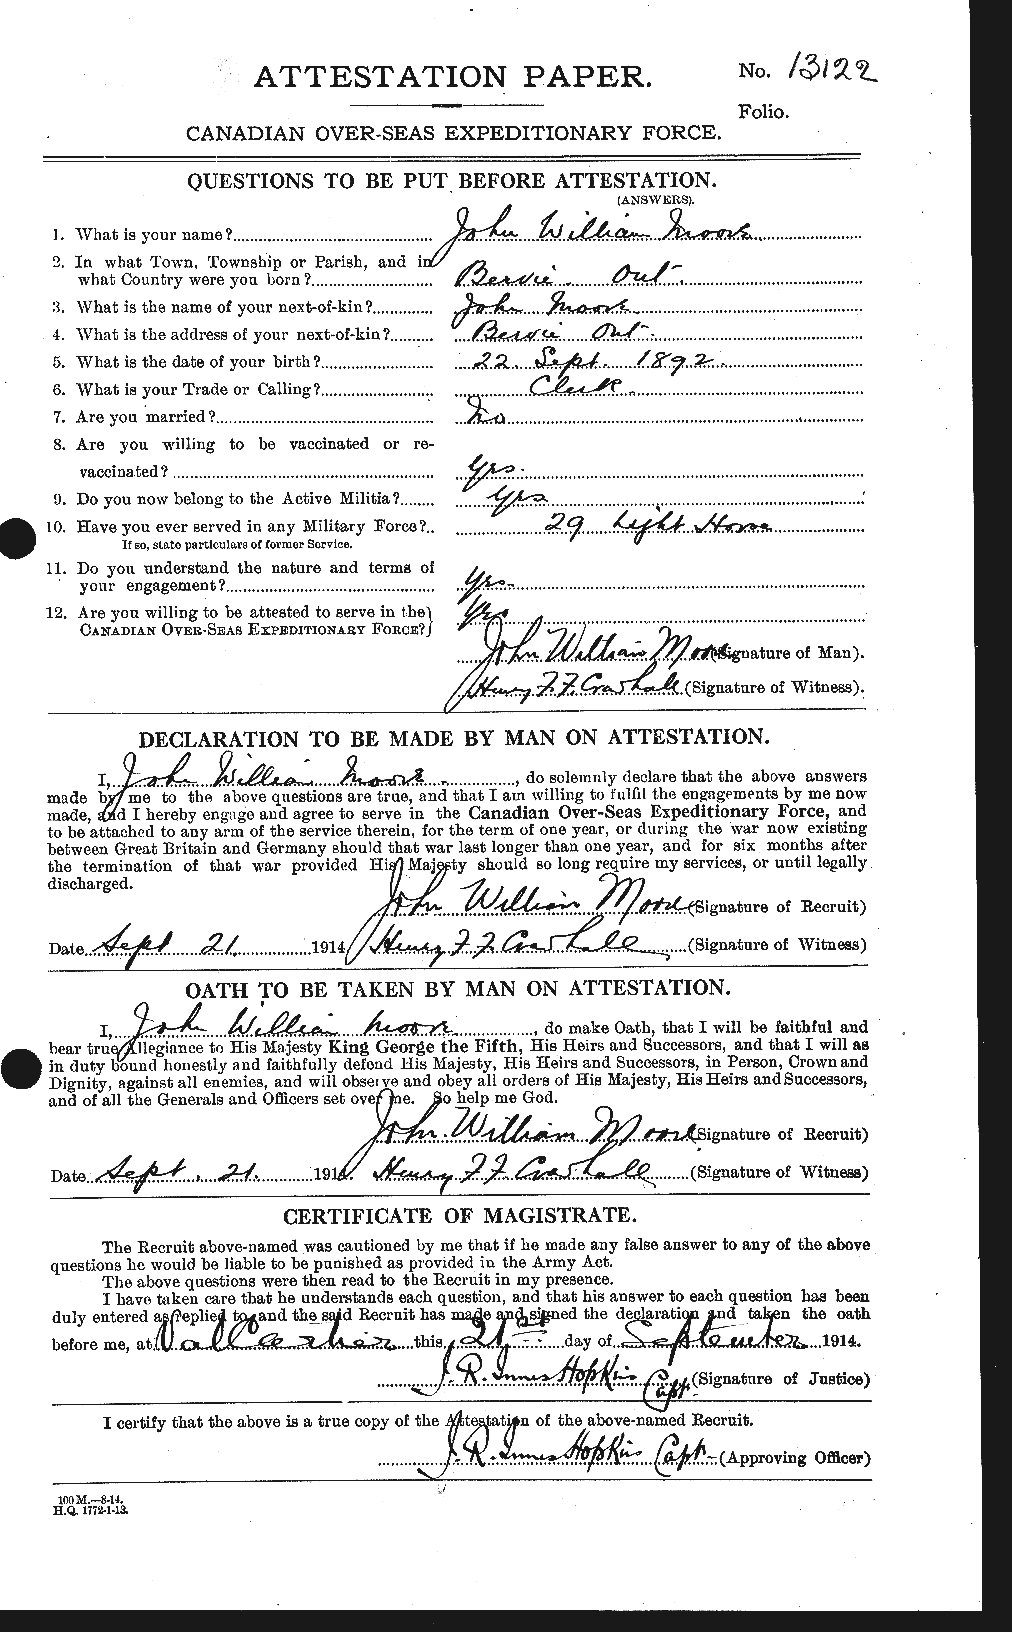 Personnel Records of the First World War - CEF 503353a